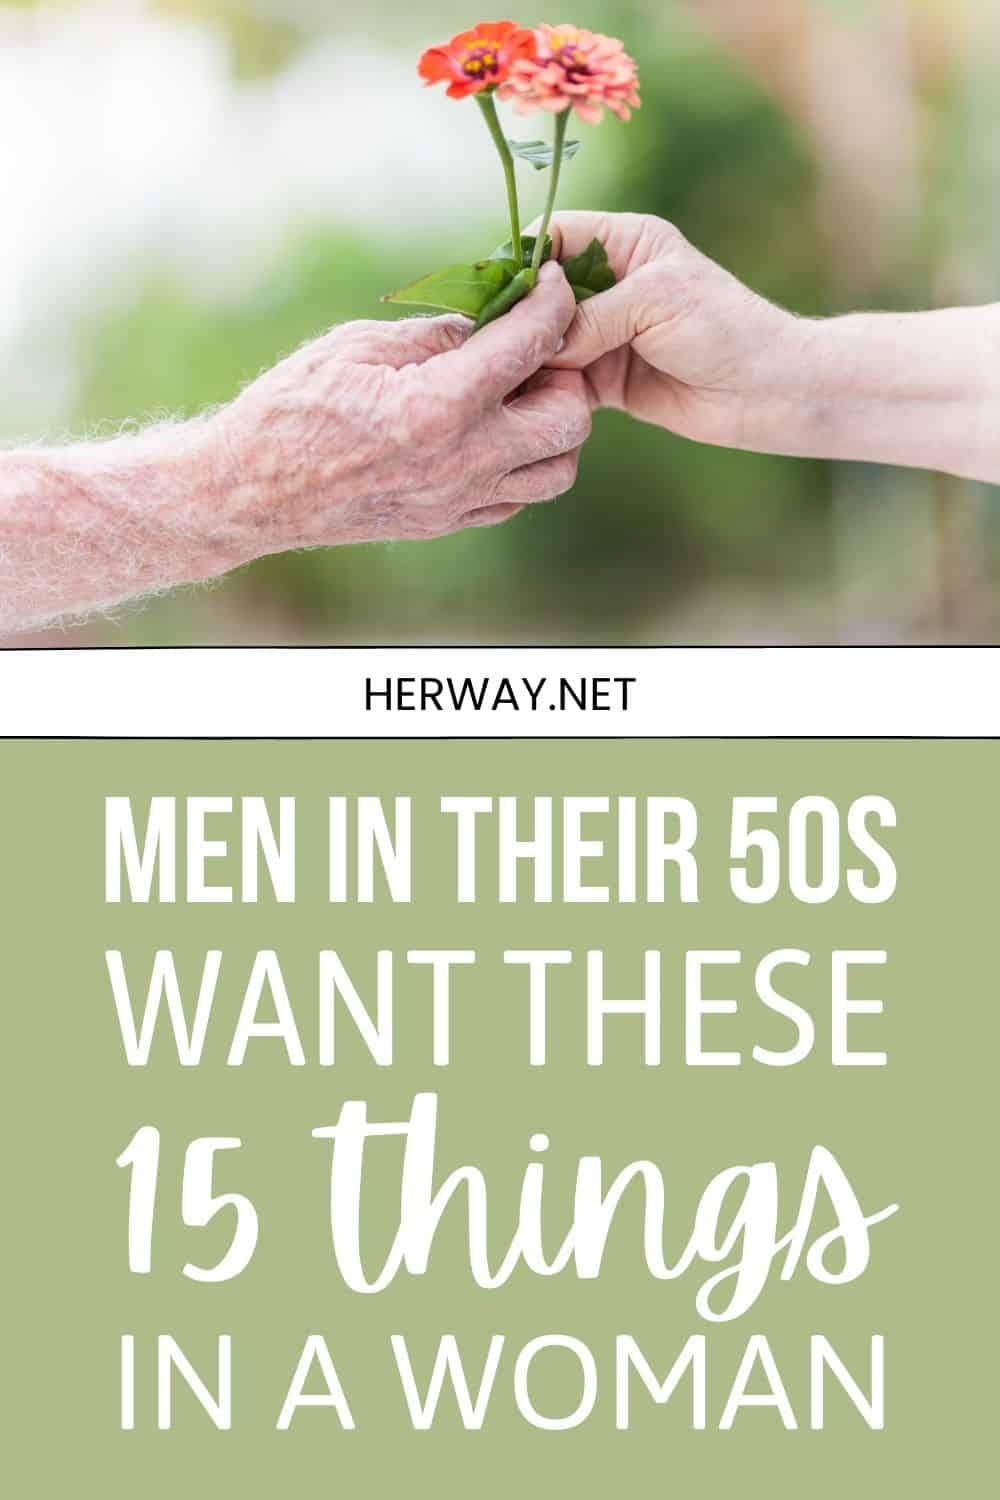 What Do Men In Their 50s Want In A Woman Top 15 Things Pinterest